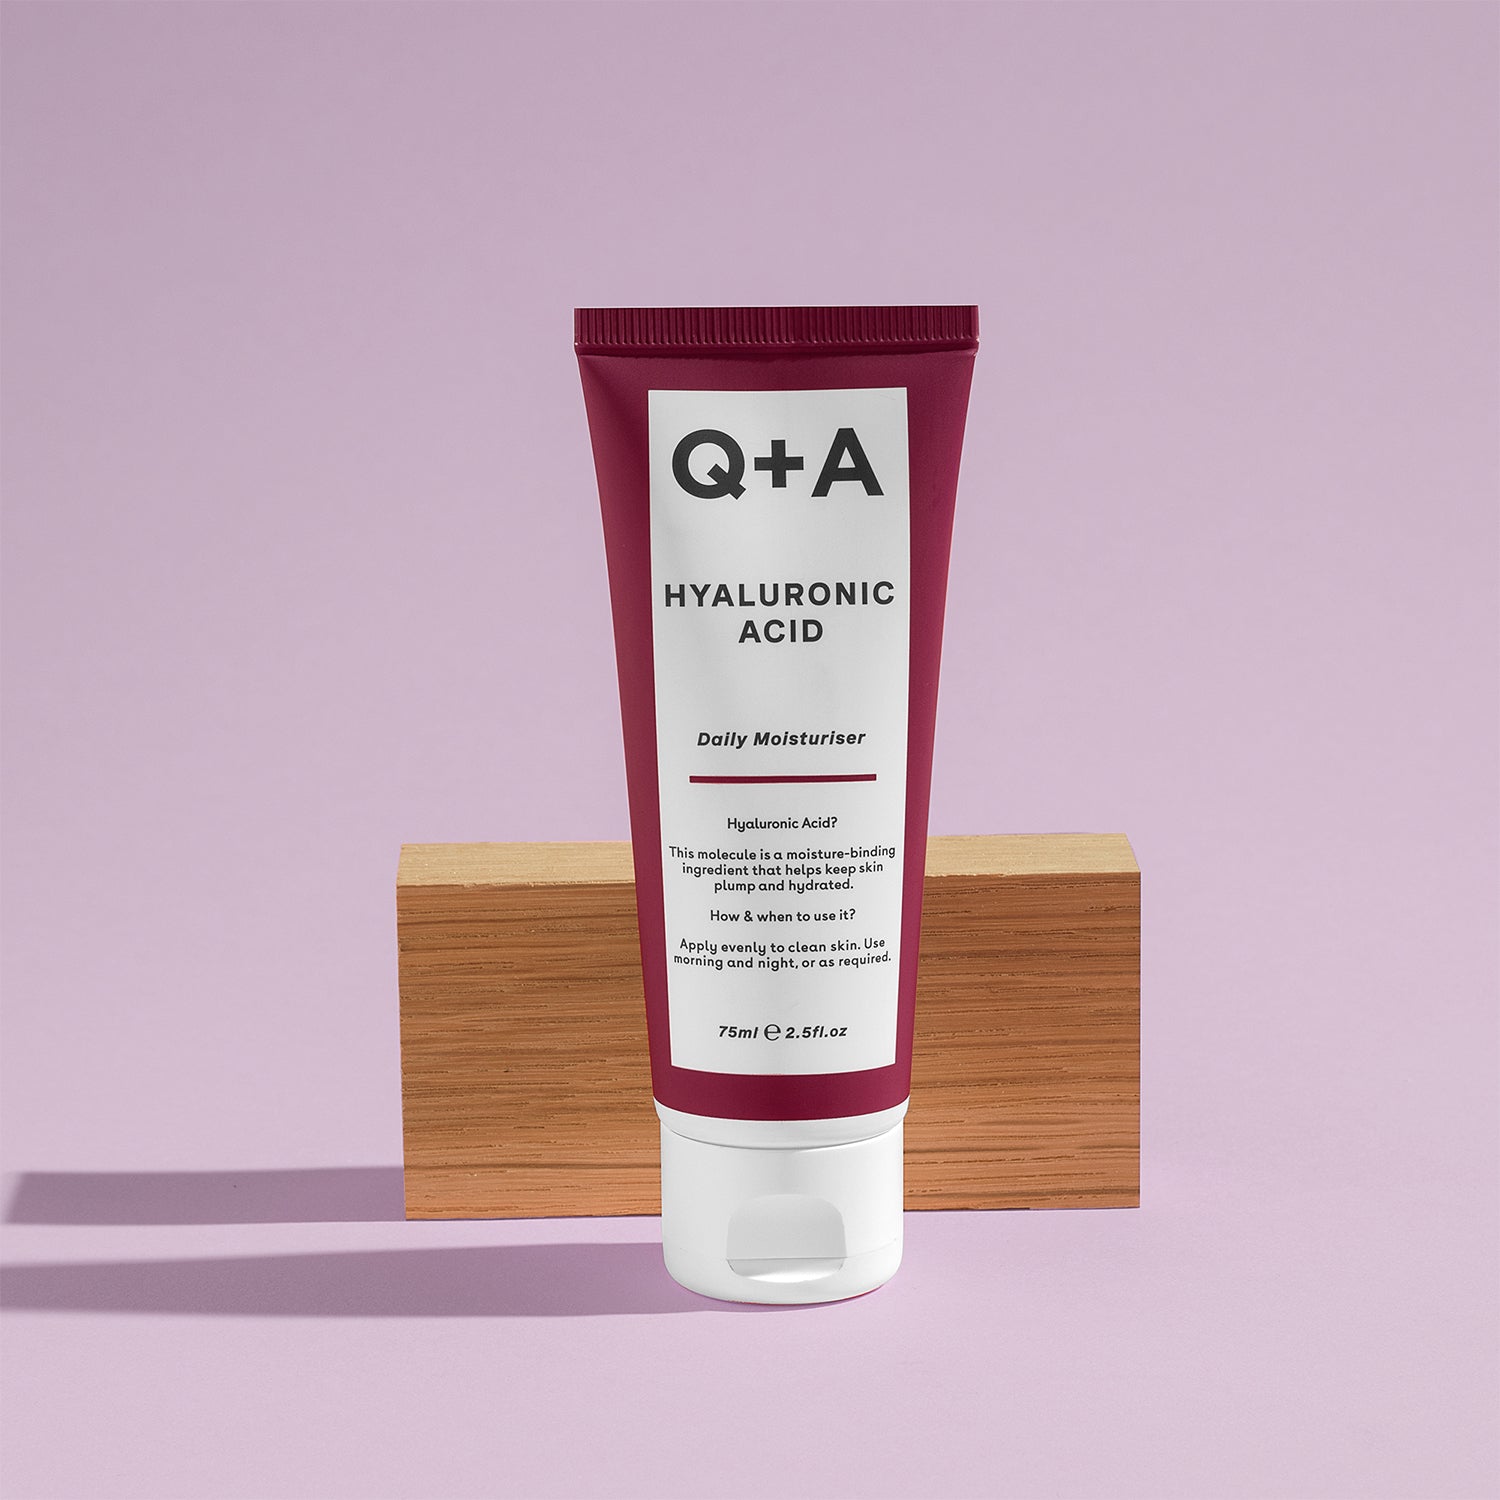 Hyaluronic Acid face cream – Daily moisturizer Q+A Suisse